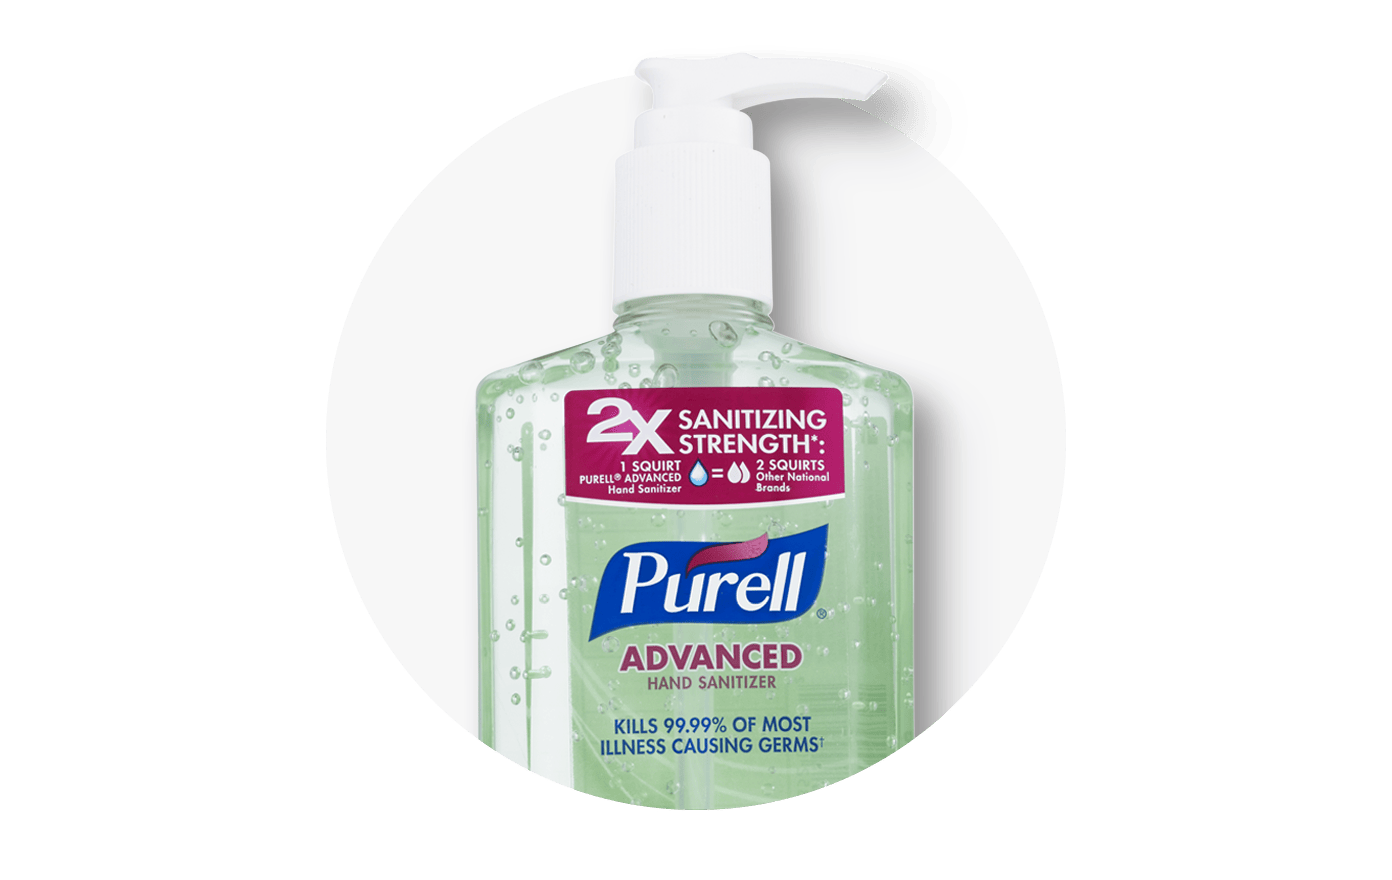 Hand sanitizer, showing Purell product